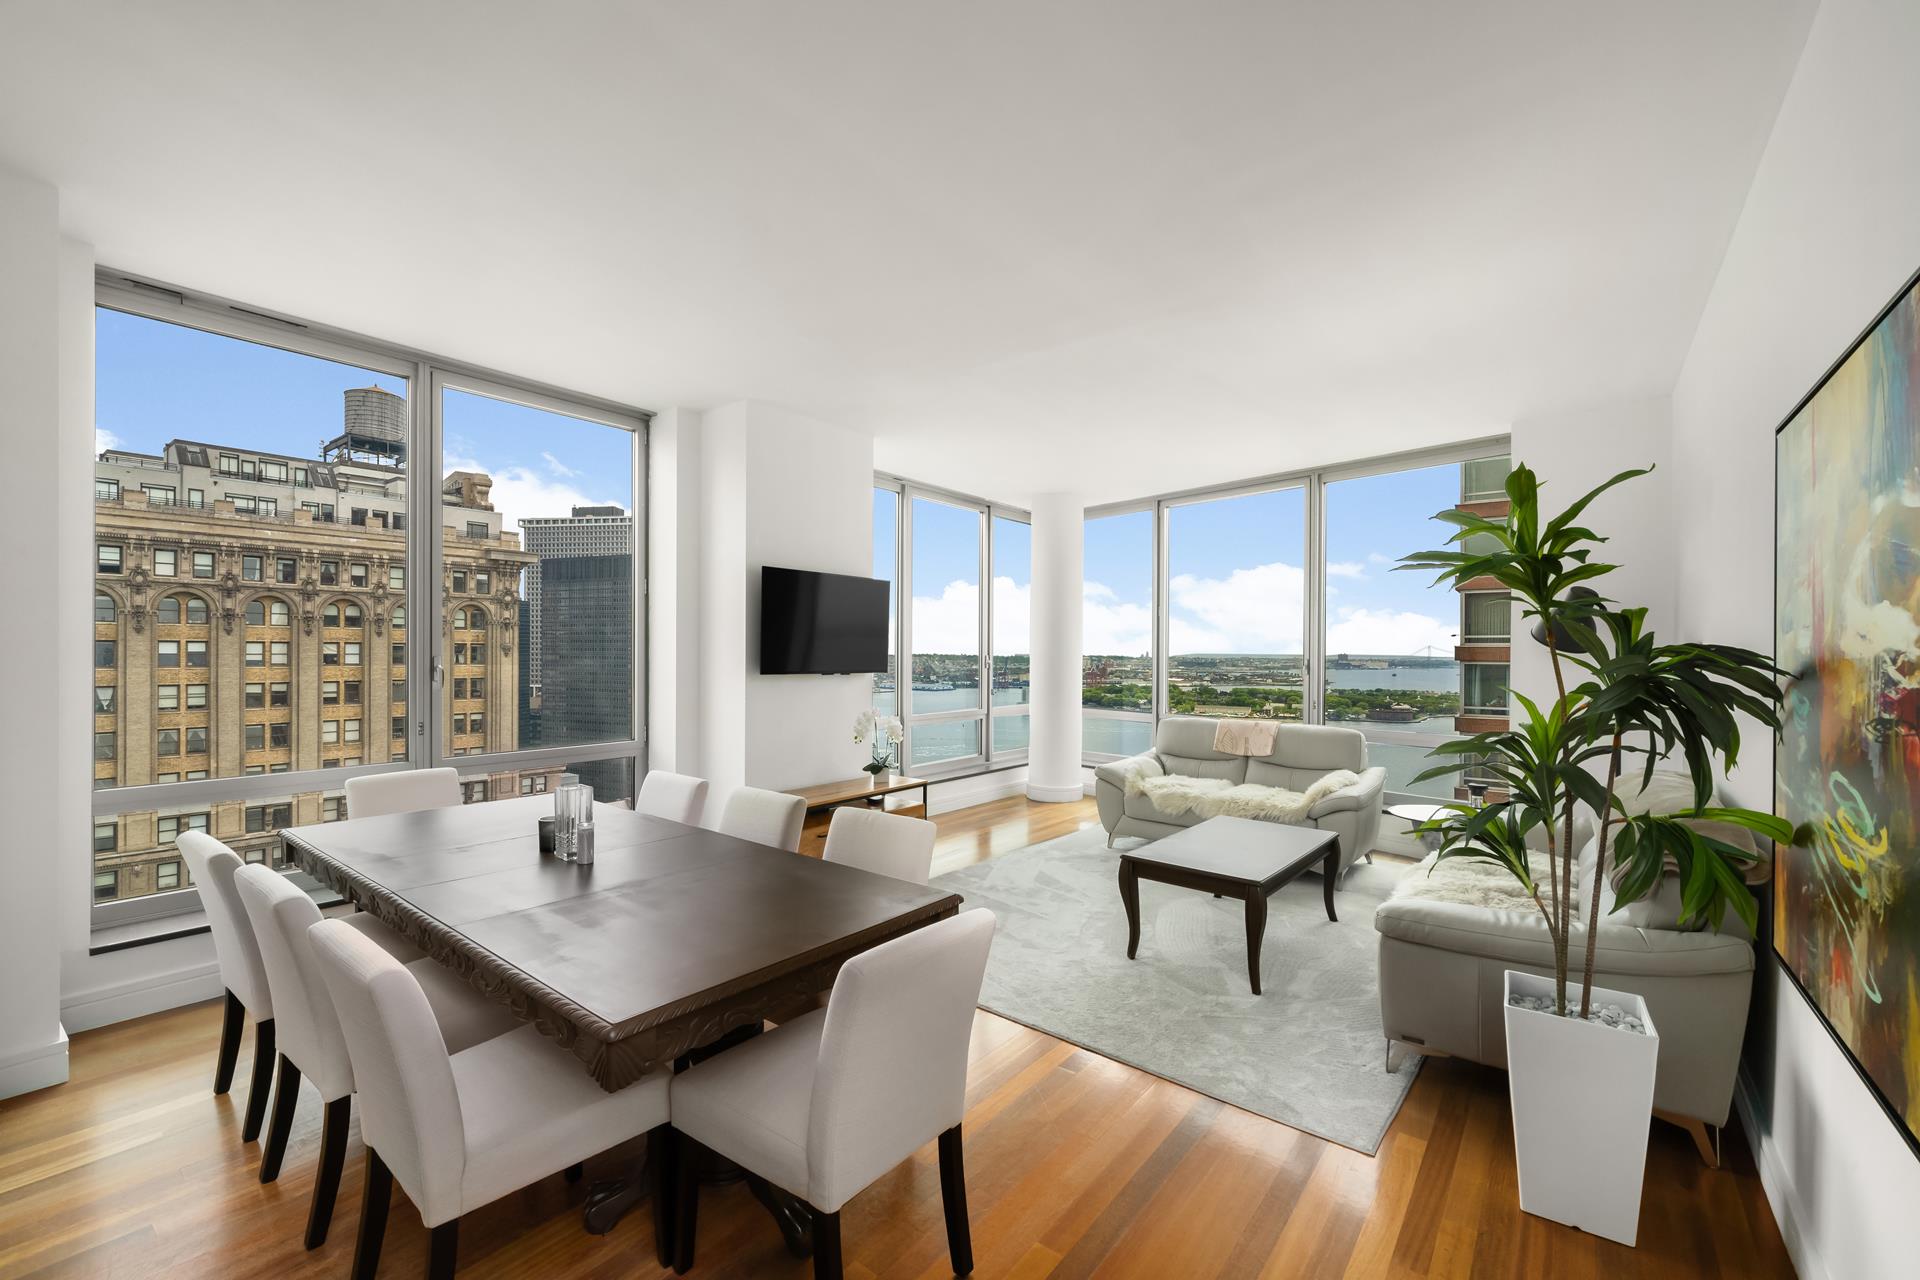 30 West Street Ph3e, Battery Park City, Downtown, NYC - 2 Bedrooms  
2.5 Bathrooms  
5 Rooms - 